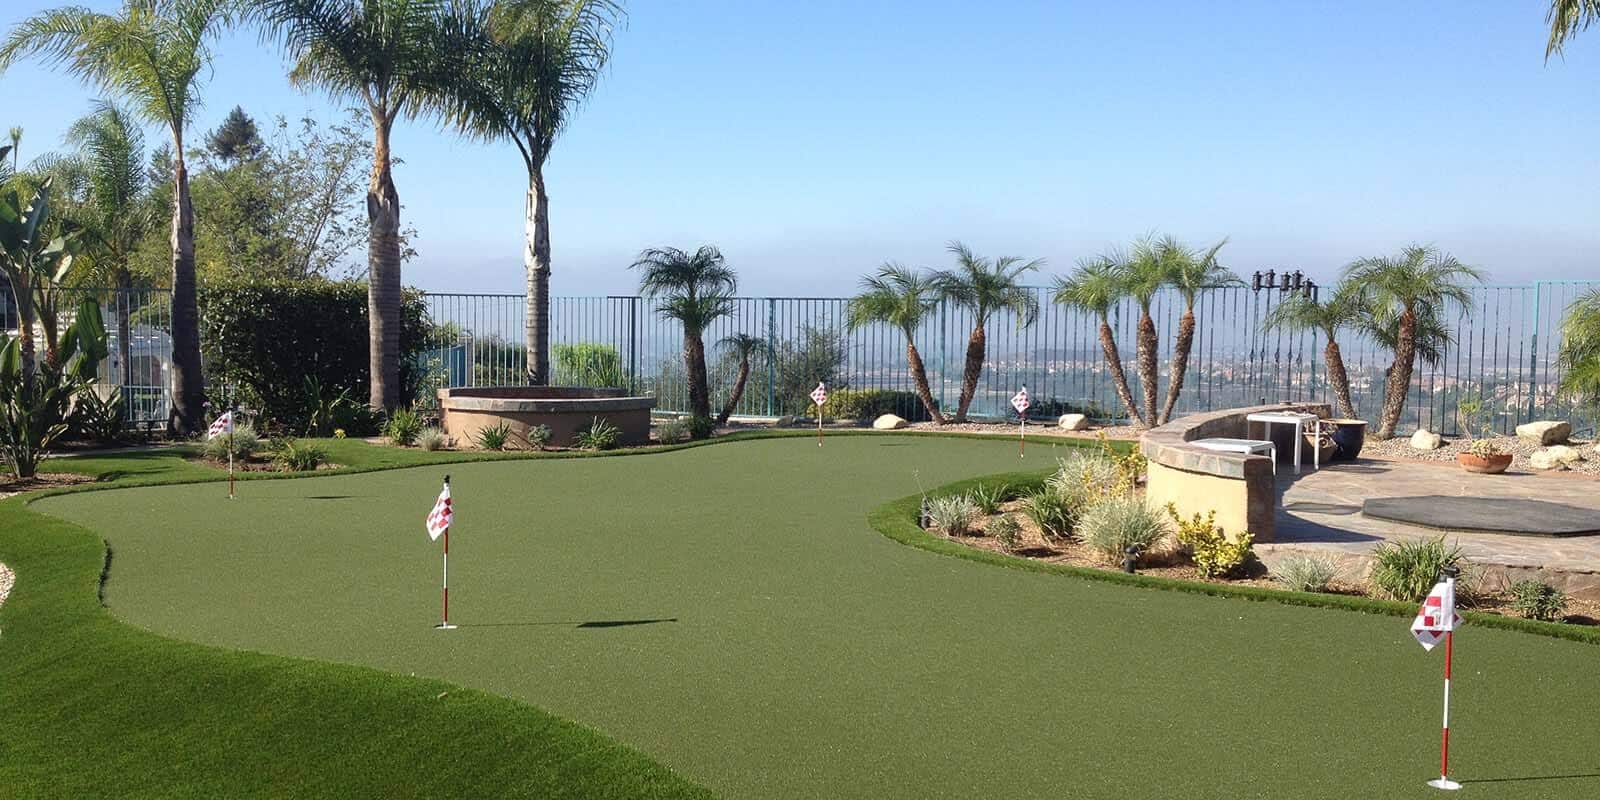 Putting Greens, Synthetic Lawn Installations and Backard Golf in CA.